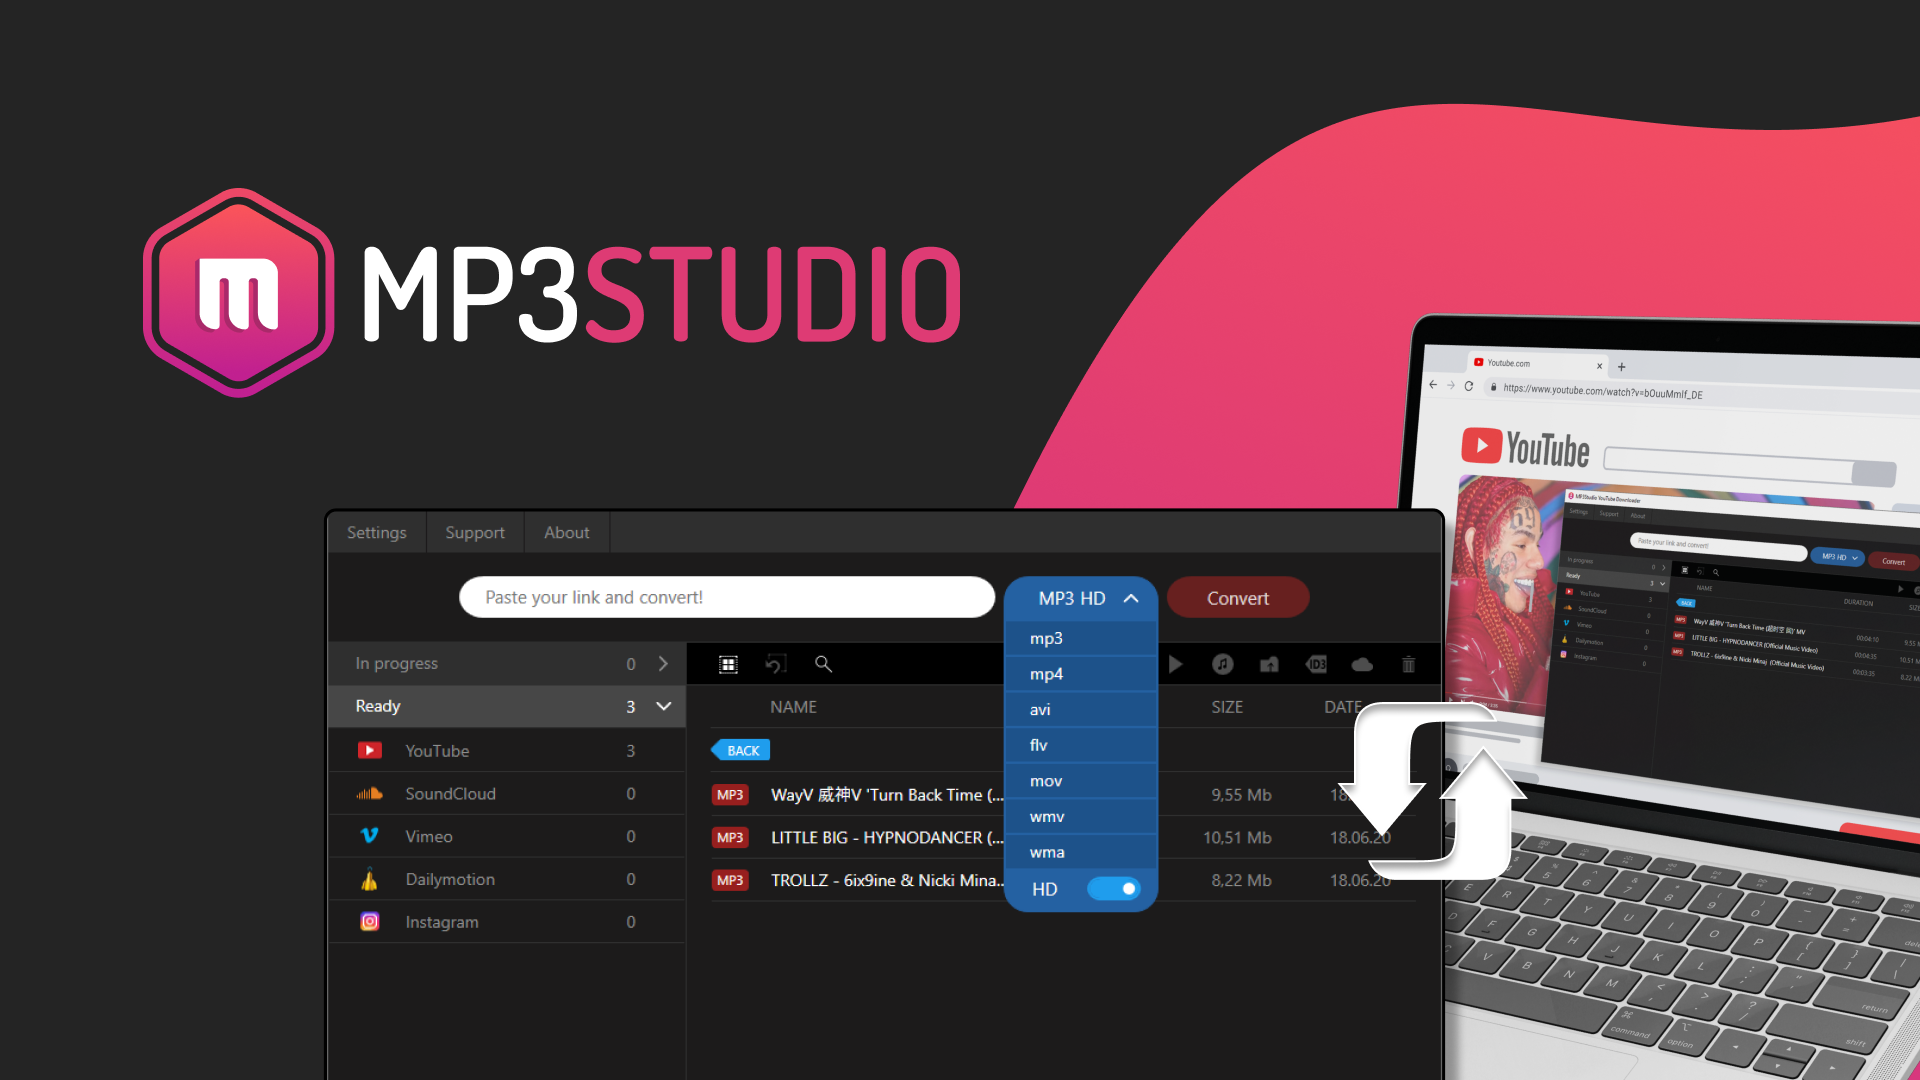 MP3Studio YouTube Downloader 2.0.25.3 instal the new for windows